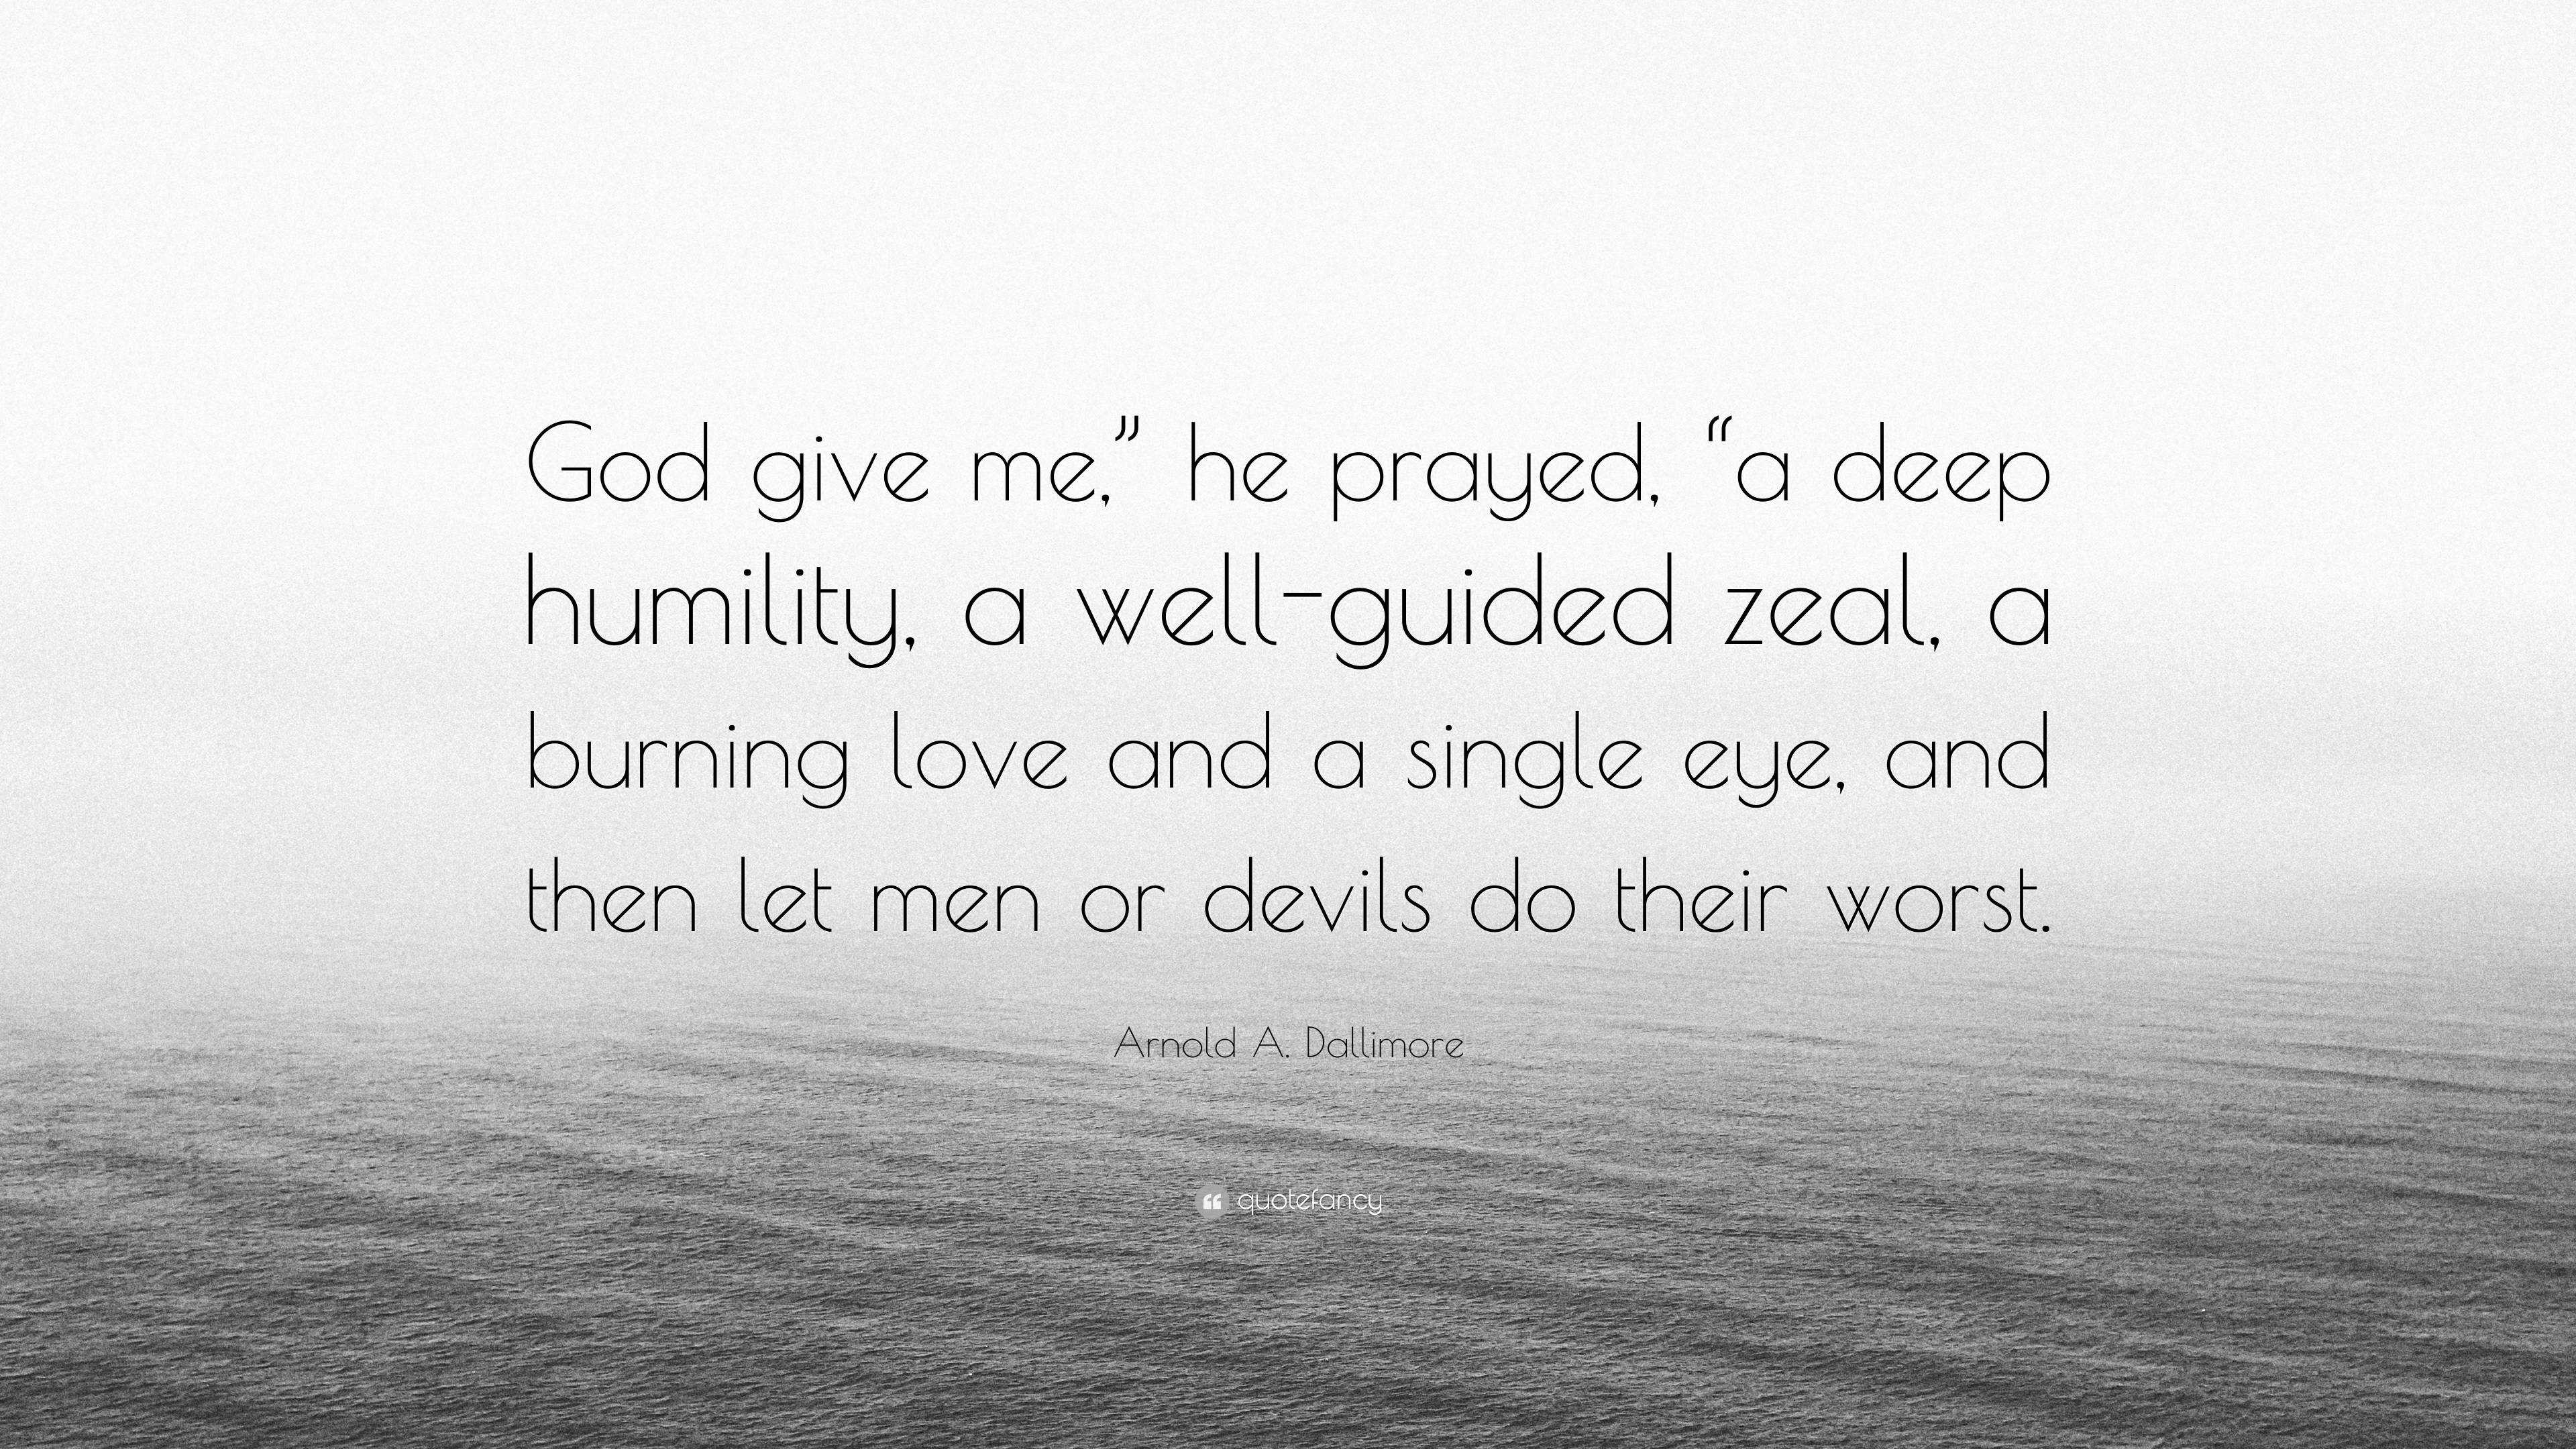 Arnold A. Dallimore Quote: “God give me,” he prayed, “a deep humility ...